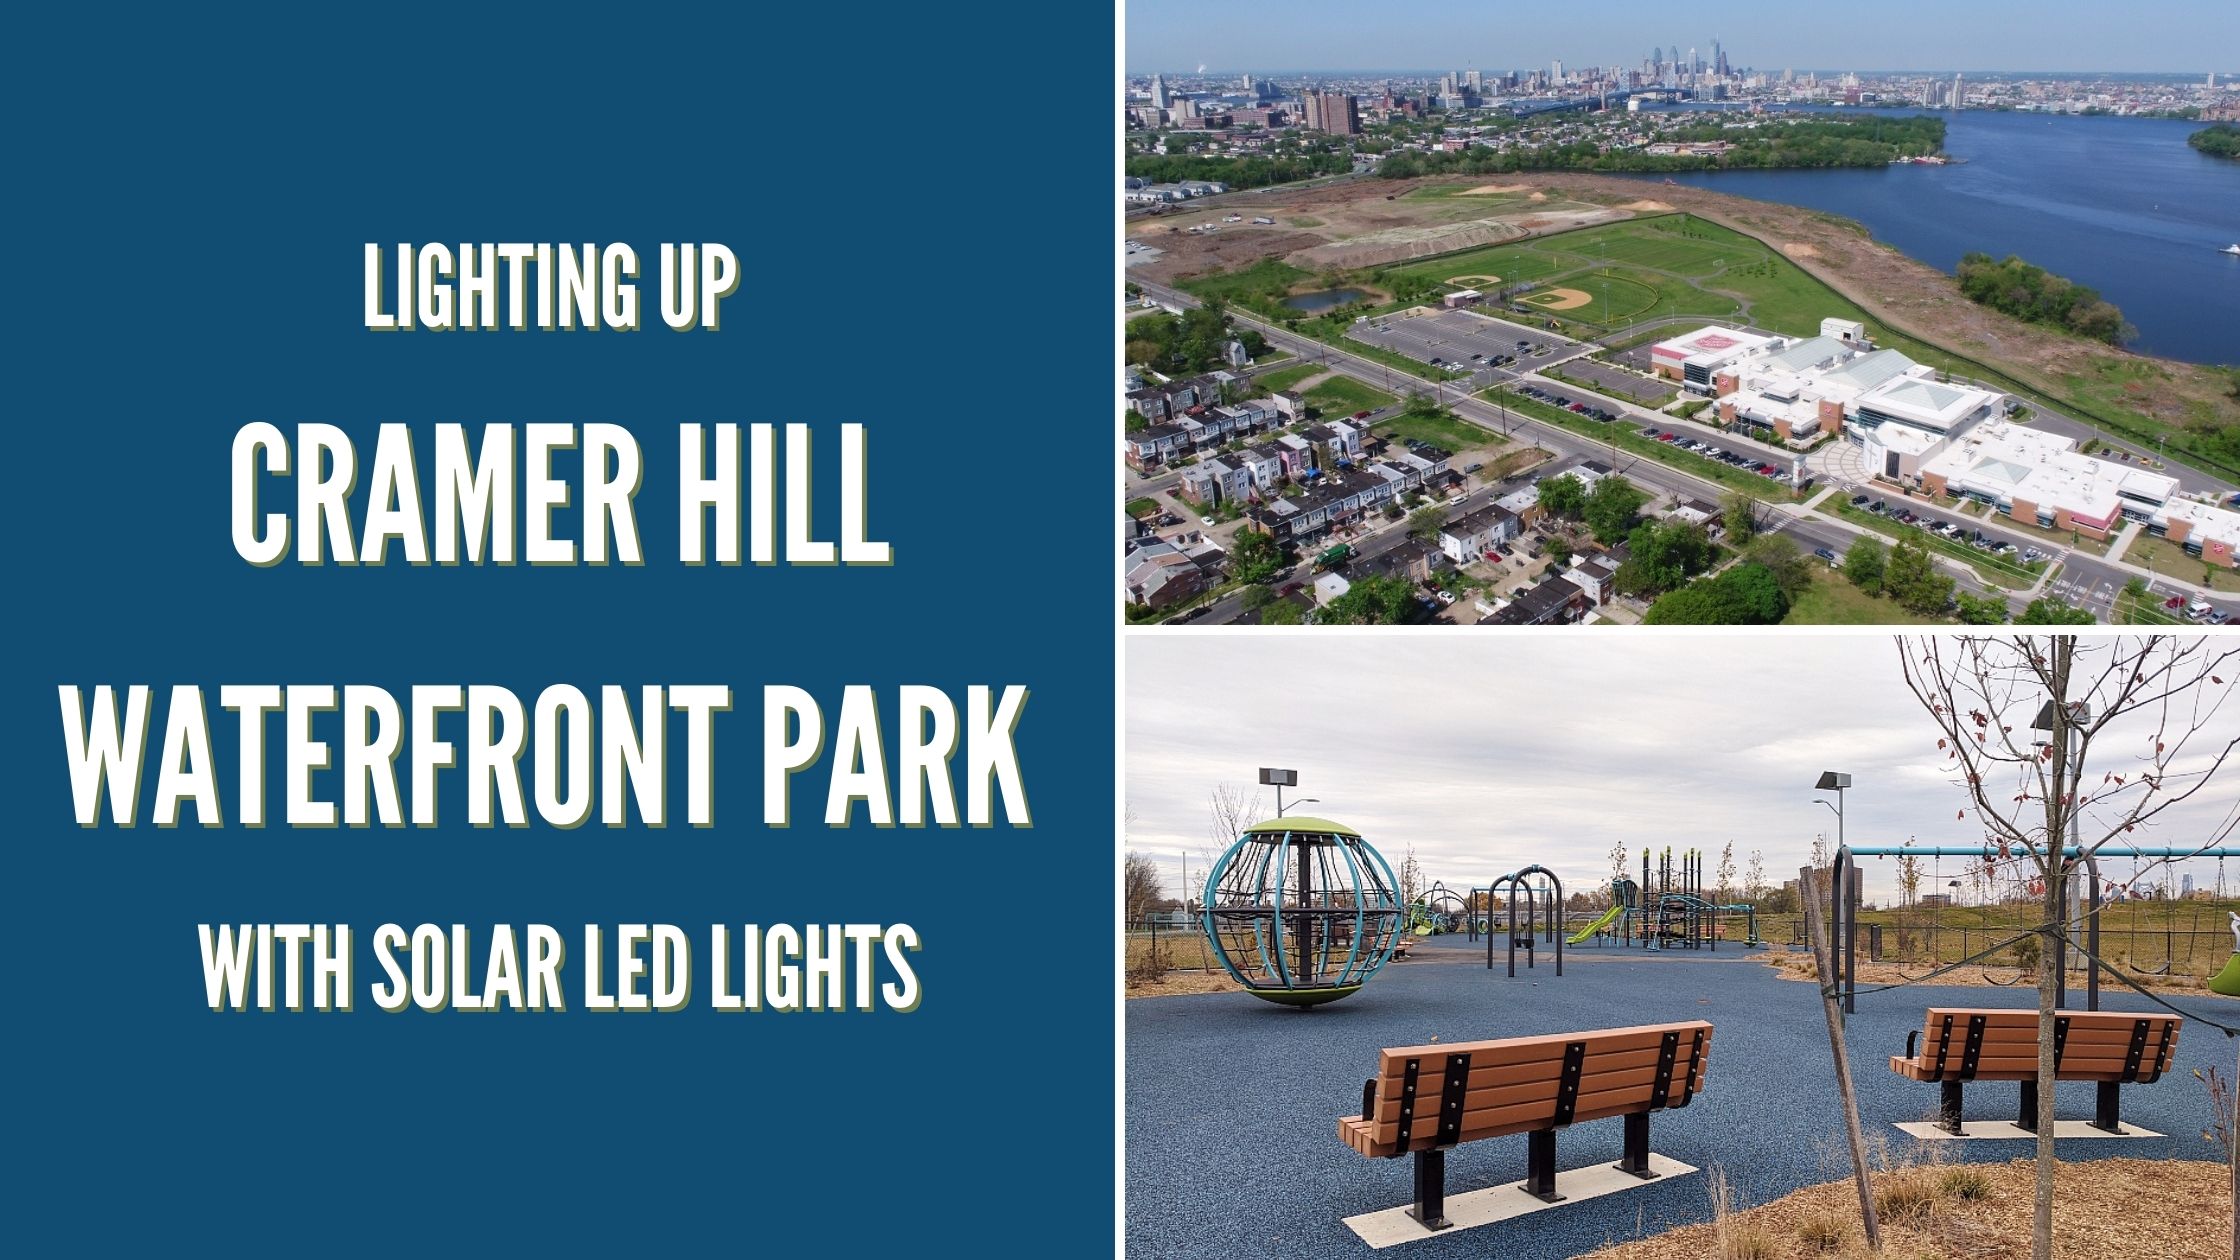 Lighting Up Cramer Hill Waterfront Park with Solar LED Lights